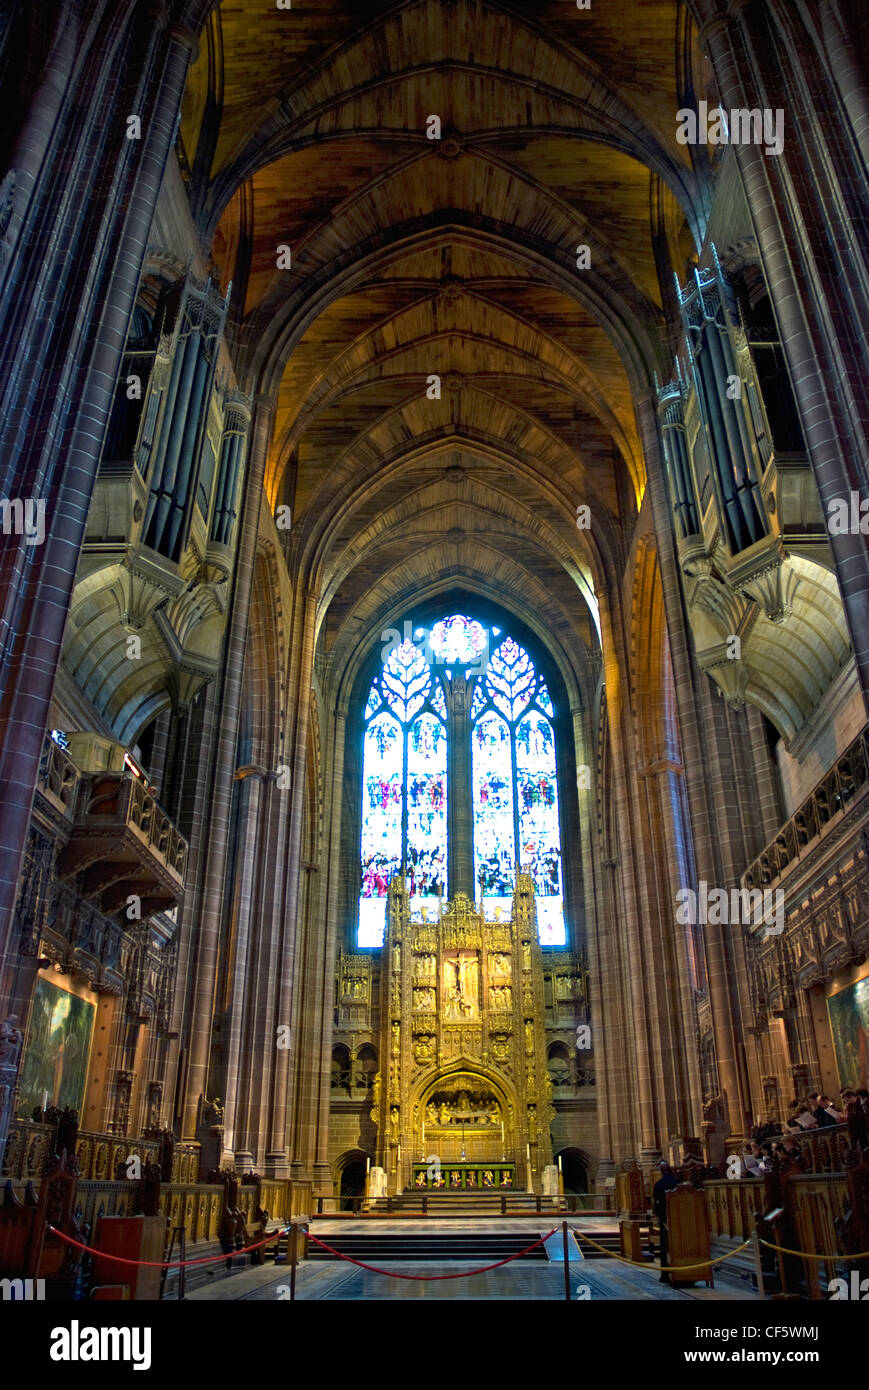 The High Altar inside Liverpool Cathedral. The cathedral is the largest in the UK and fifth largest in the world. Stock Photo